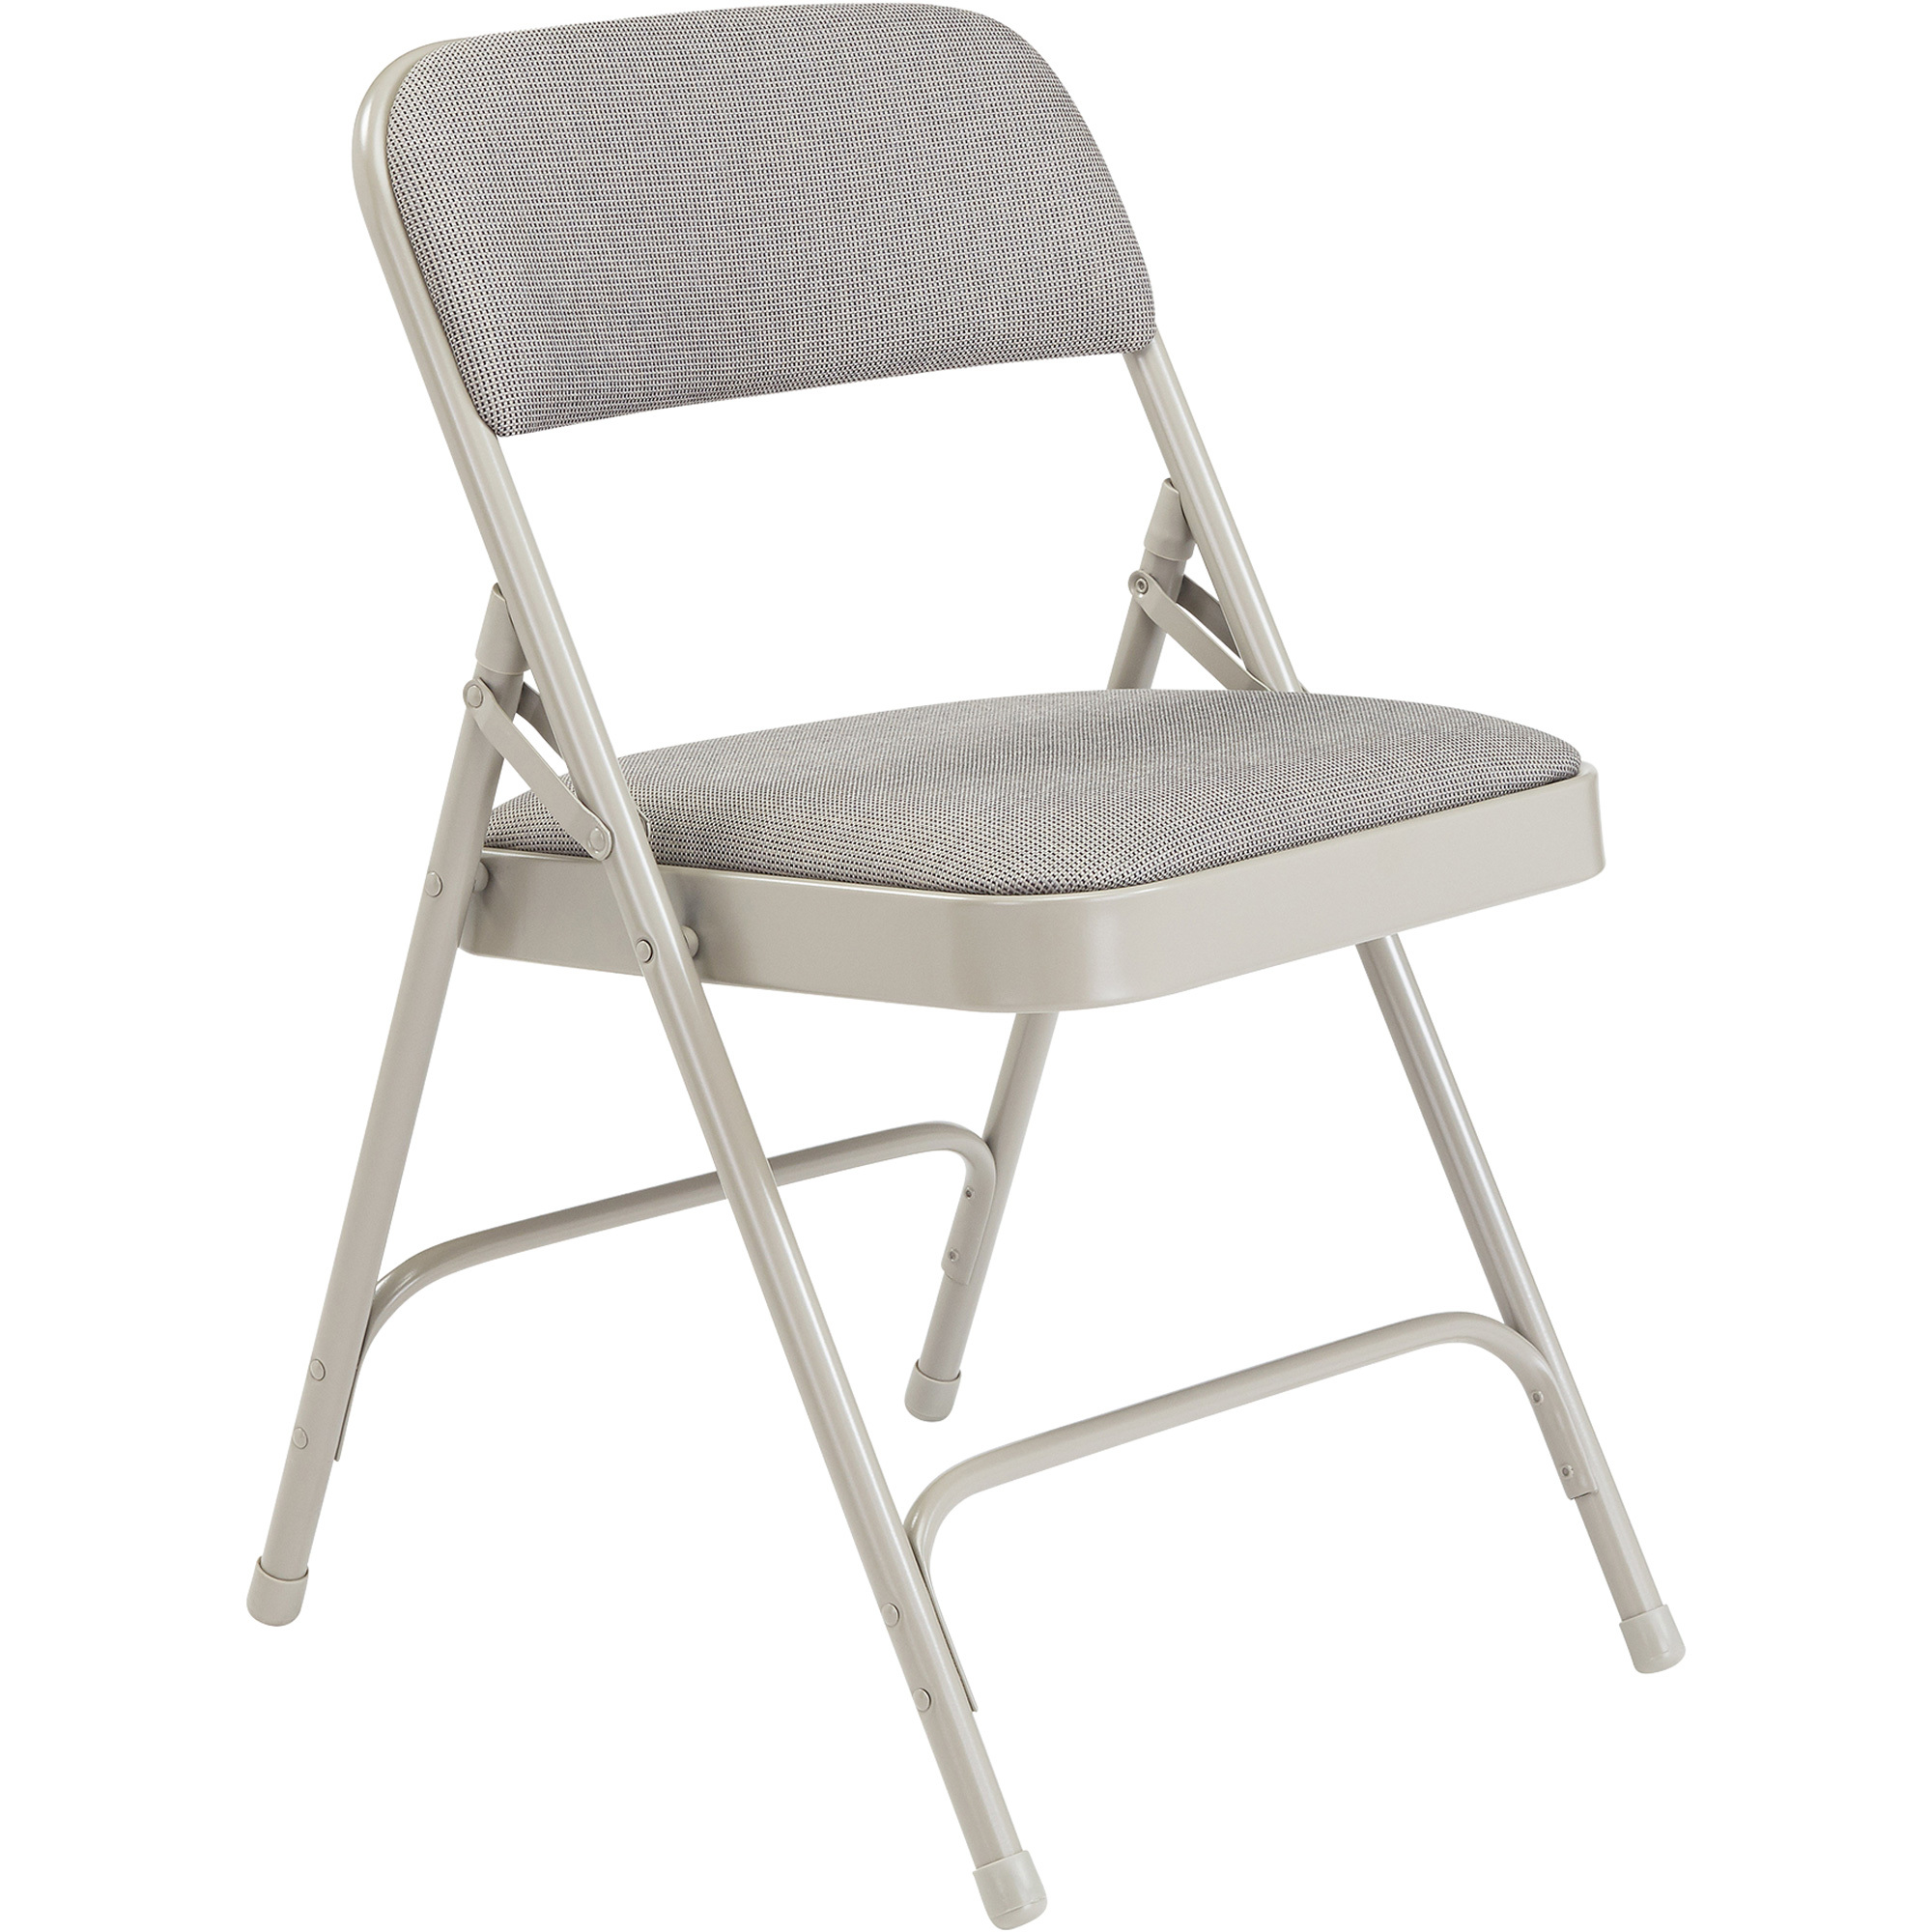 Steel Folding Chairs with Fabric Padded Seat and Back — Set of 4, Greystone/Grey, Model - National Public Seating 2202